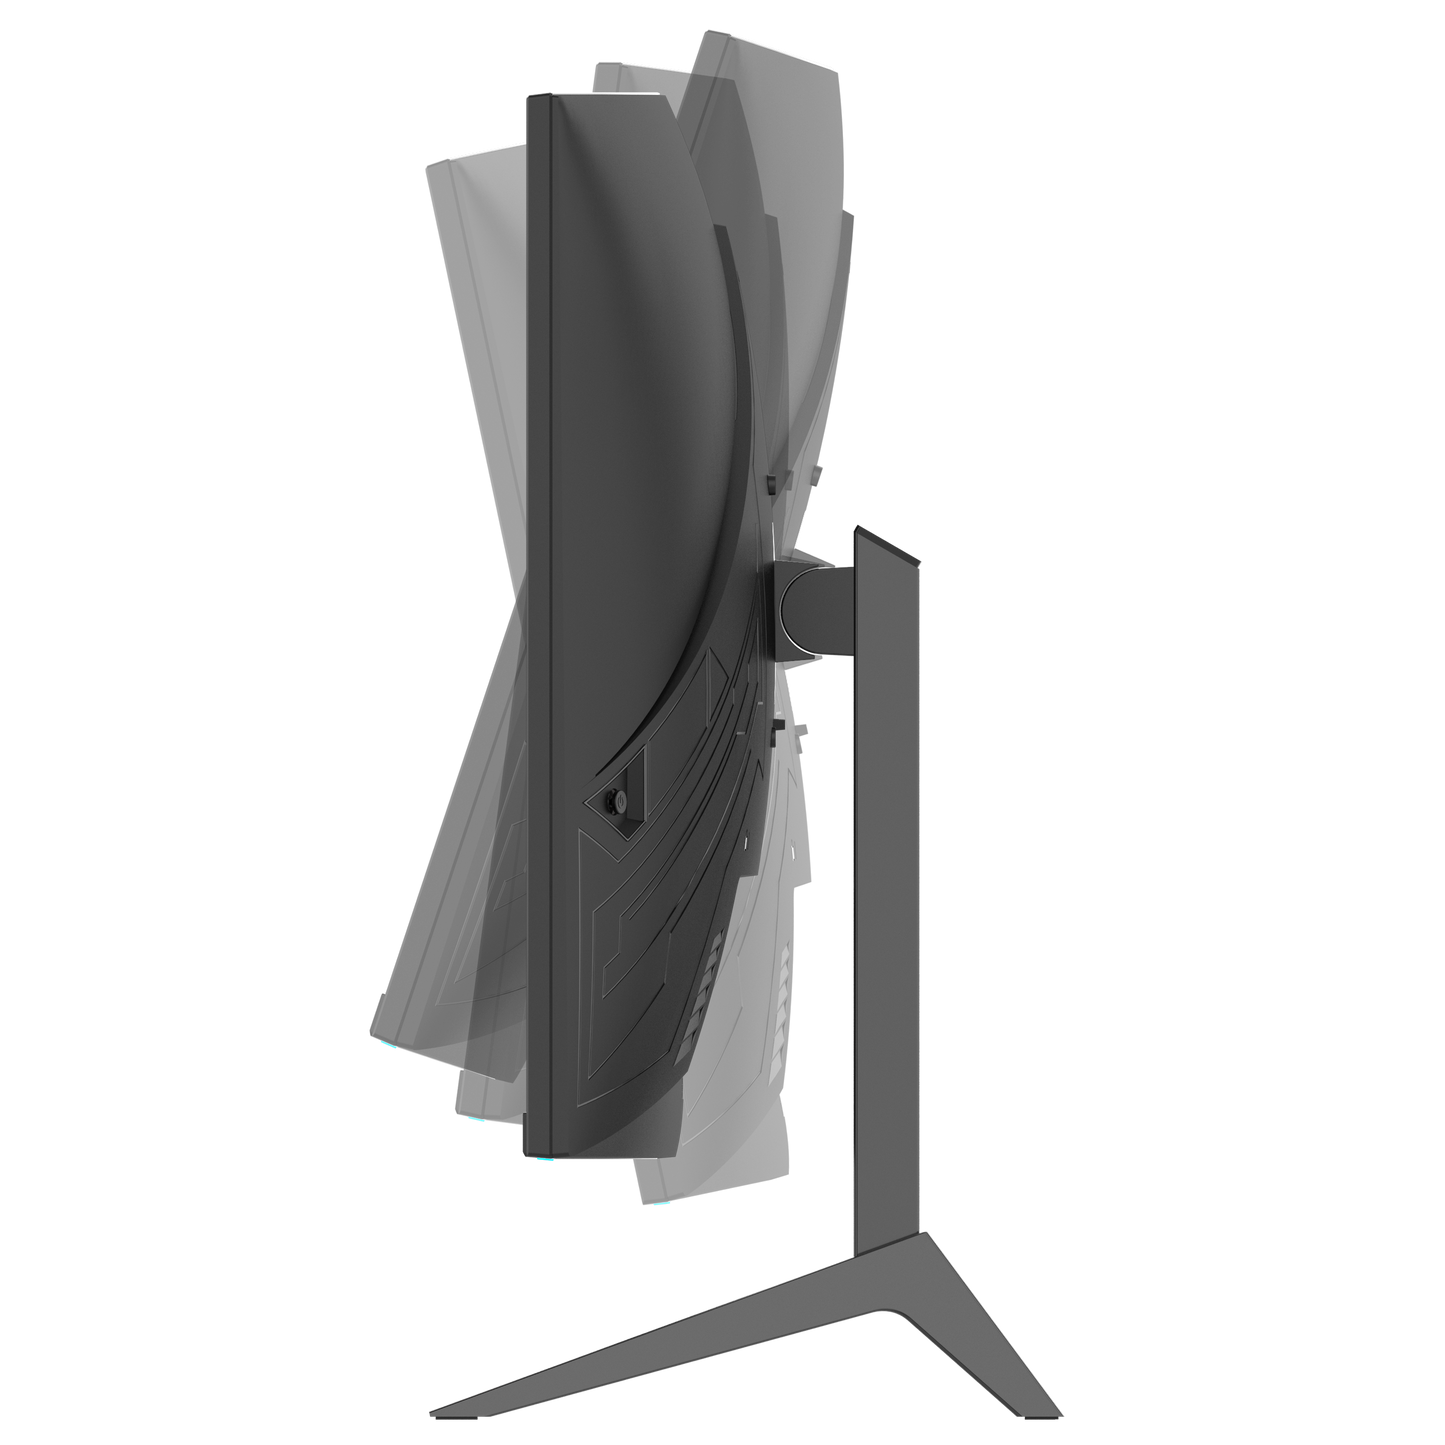 PXC277 Curved Gaming Monitor